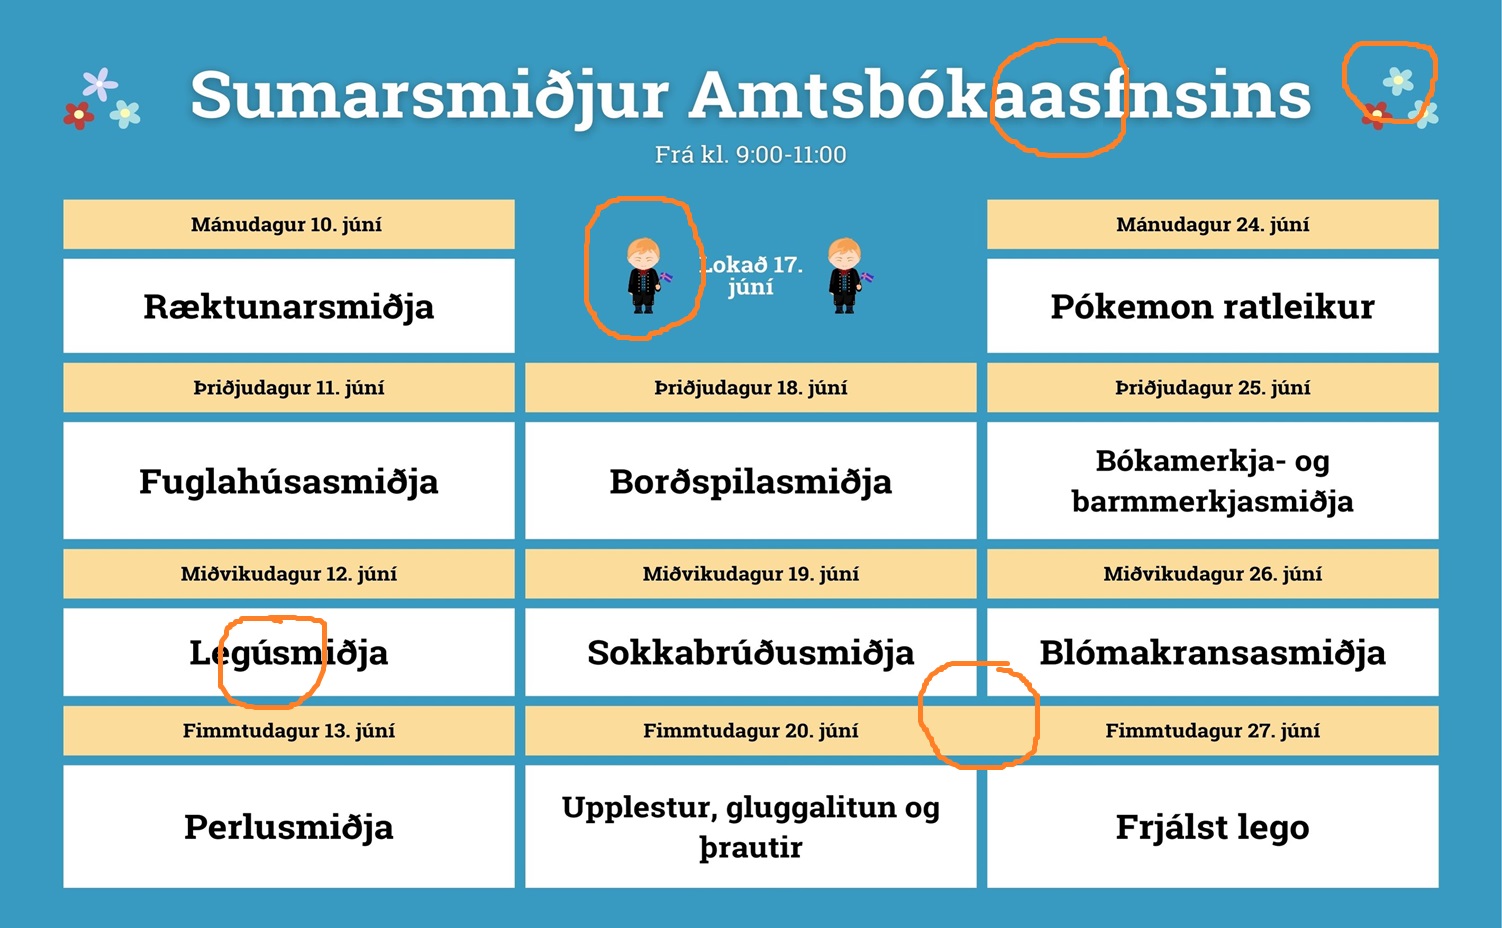 Overview (in Icelandic) of summer workshops at the Municipal Library